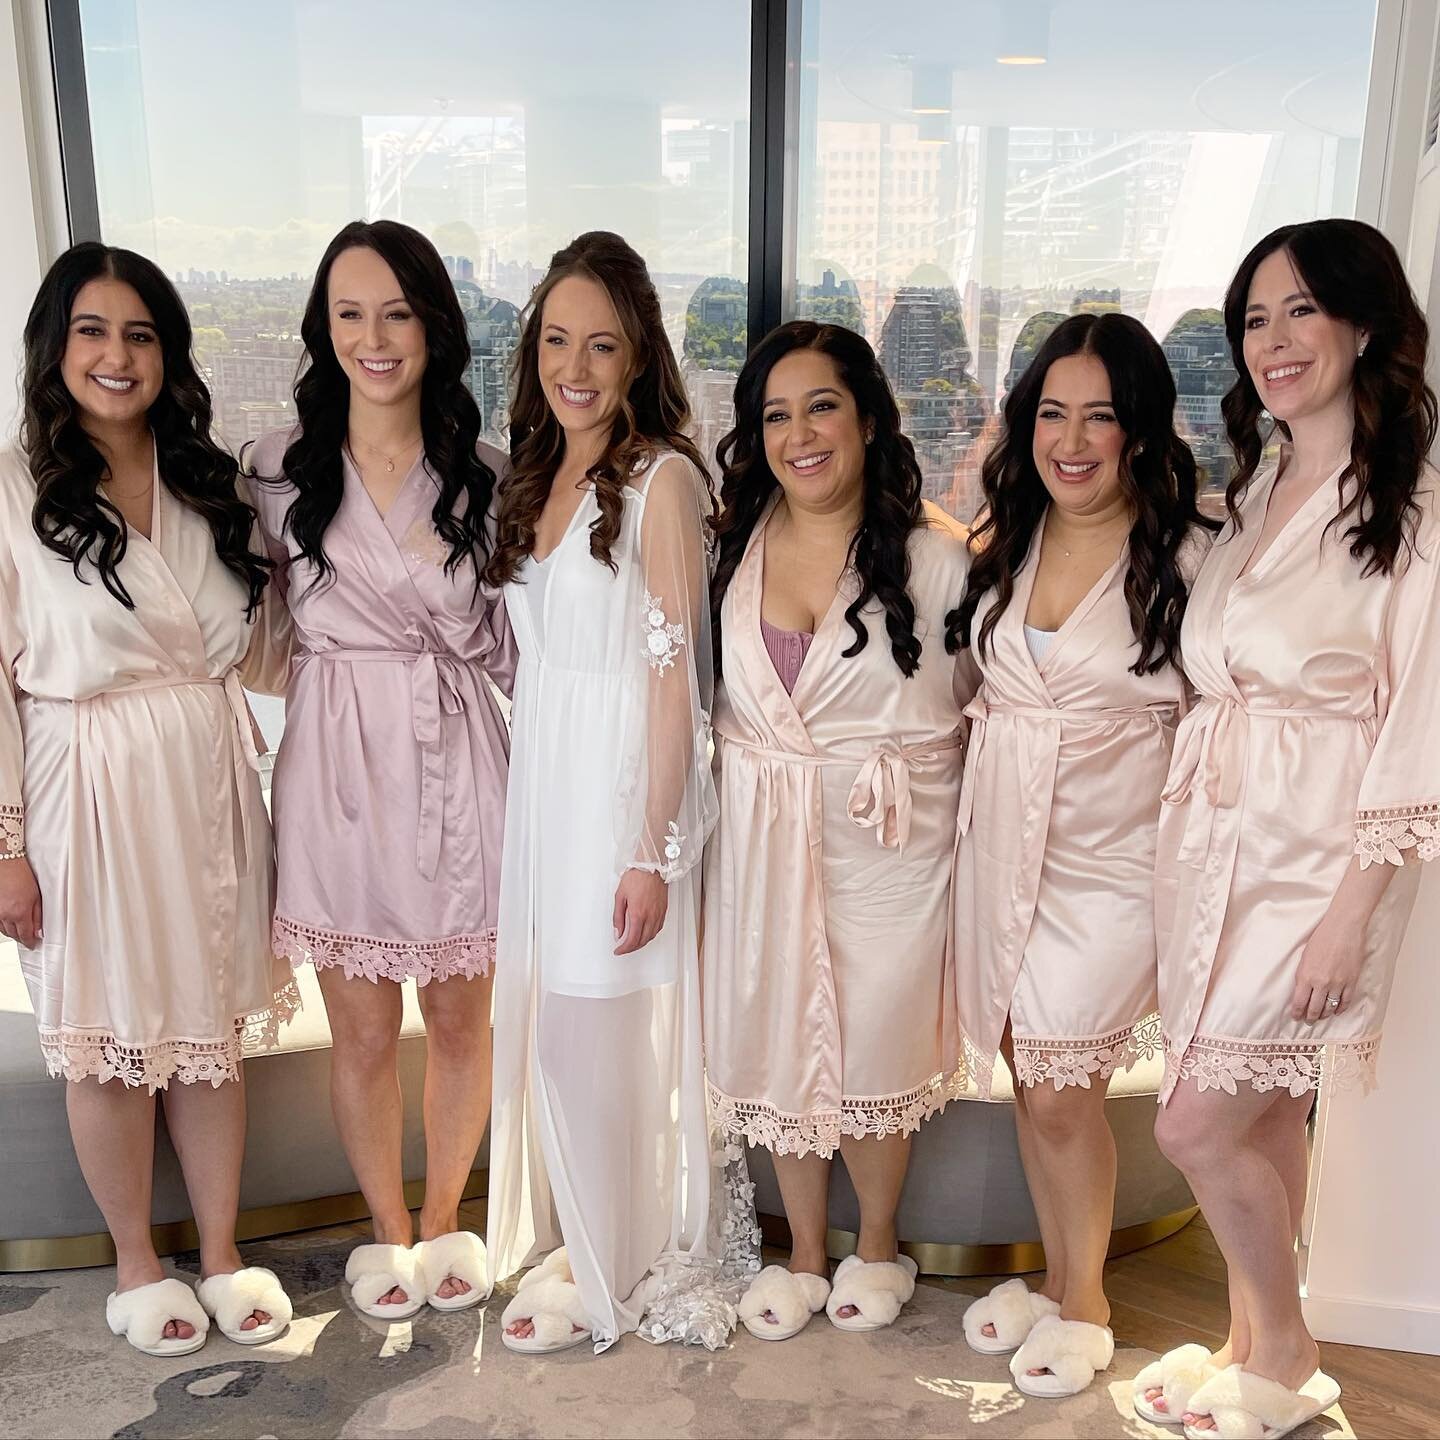 We absolutely loved getting these beautiful bridesmaids ready!
▫️
Makeup by Aj and Martha. Hair by Zerina for the bridesmaids. ✨ 
▫️

#THEGLAMOURY|THEGLAMOURY.COM
💻 Email info@theglamoury.com

#makeup #hair #vancouver #yvr #beauty #love #bridal #wed